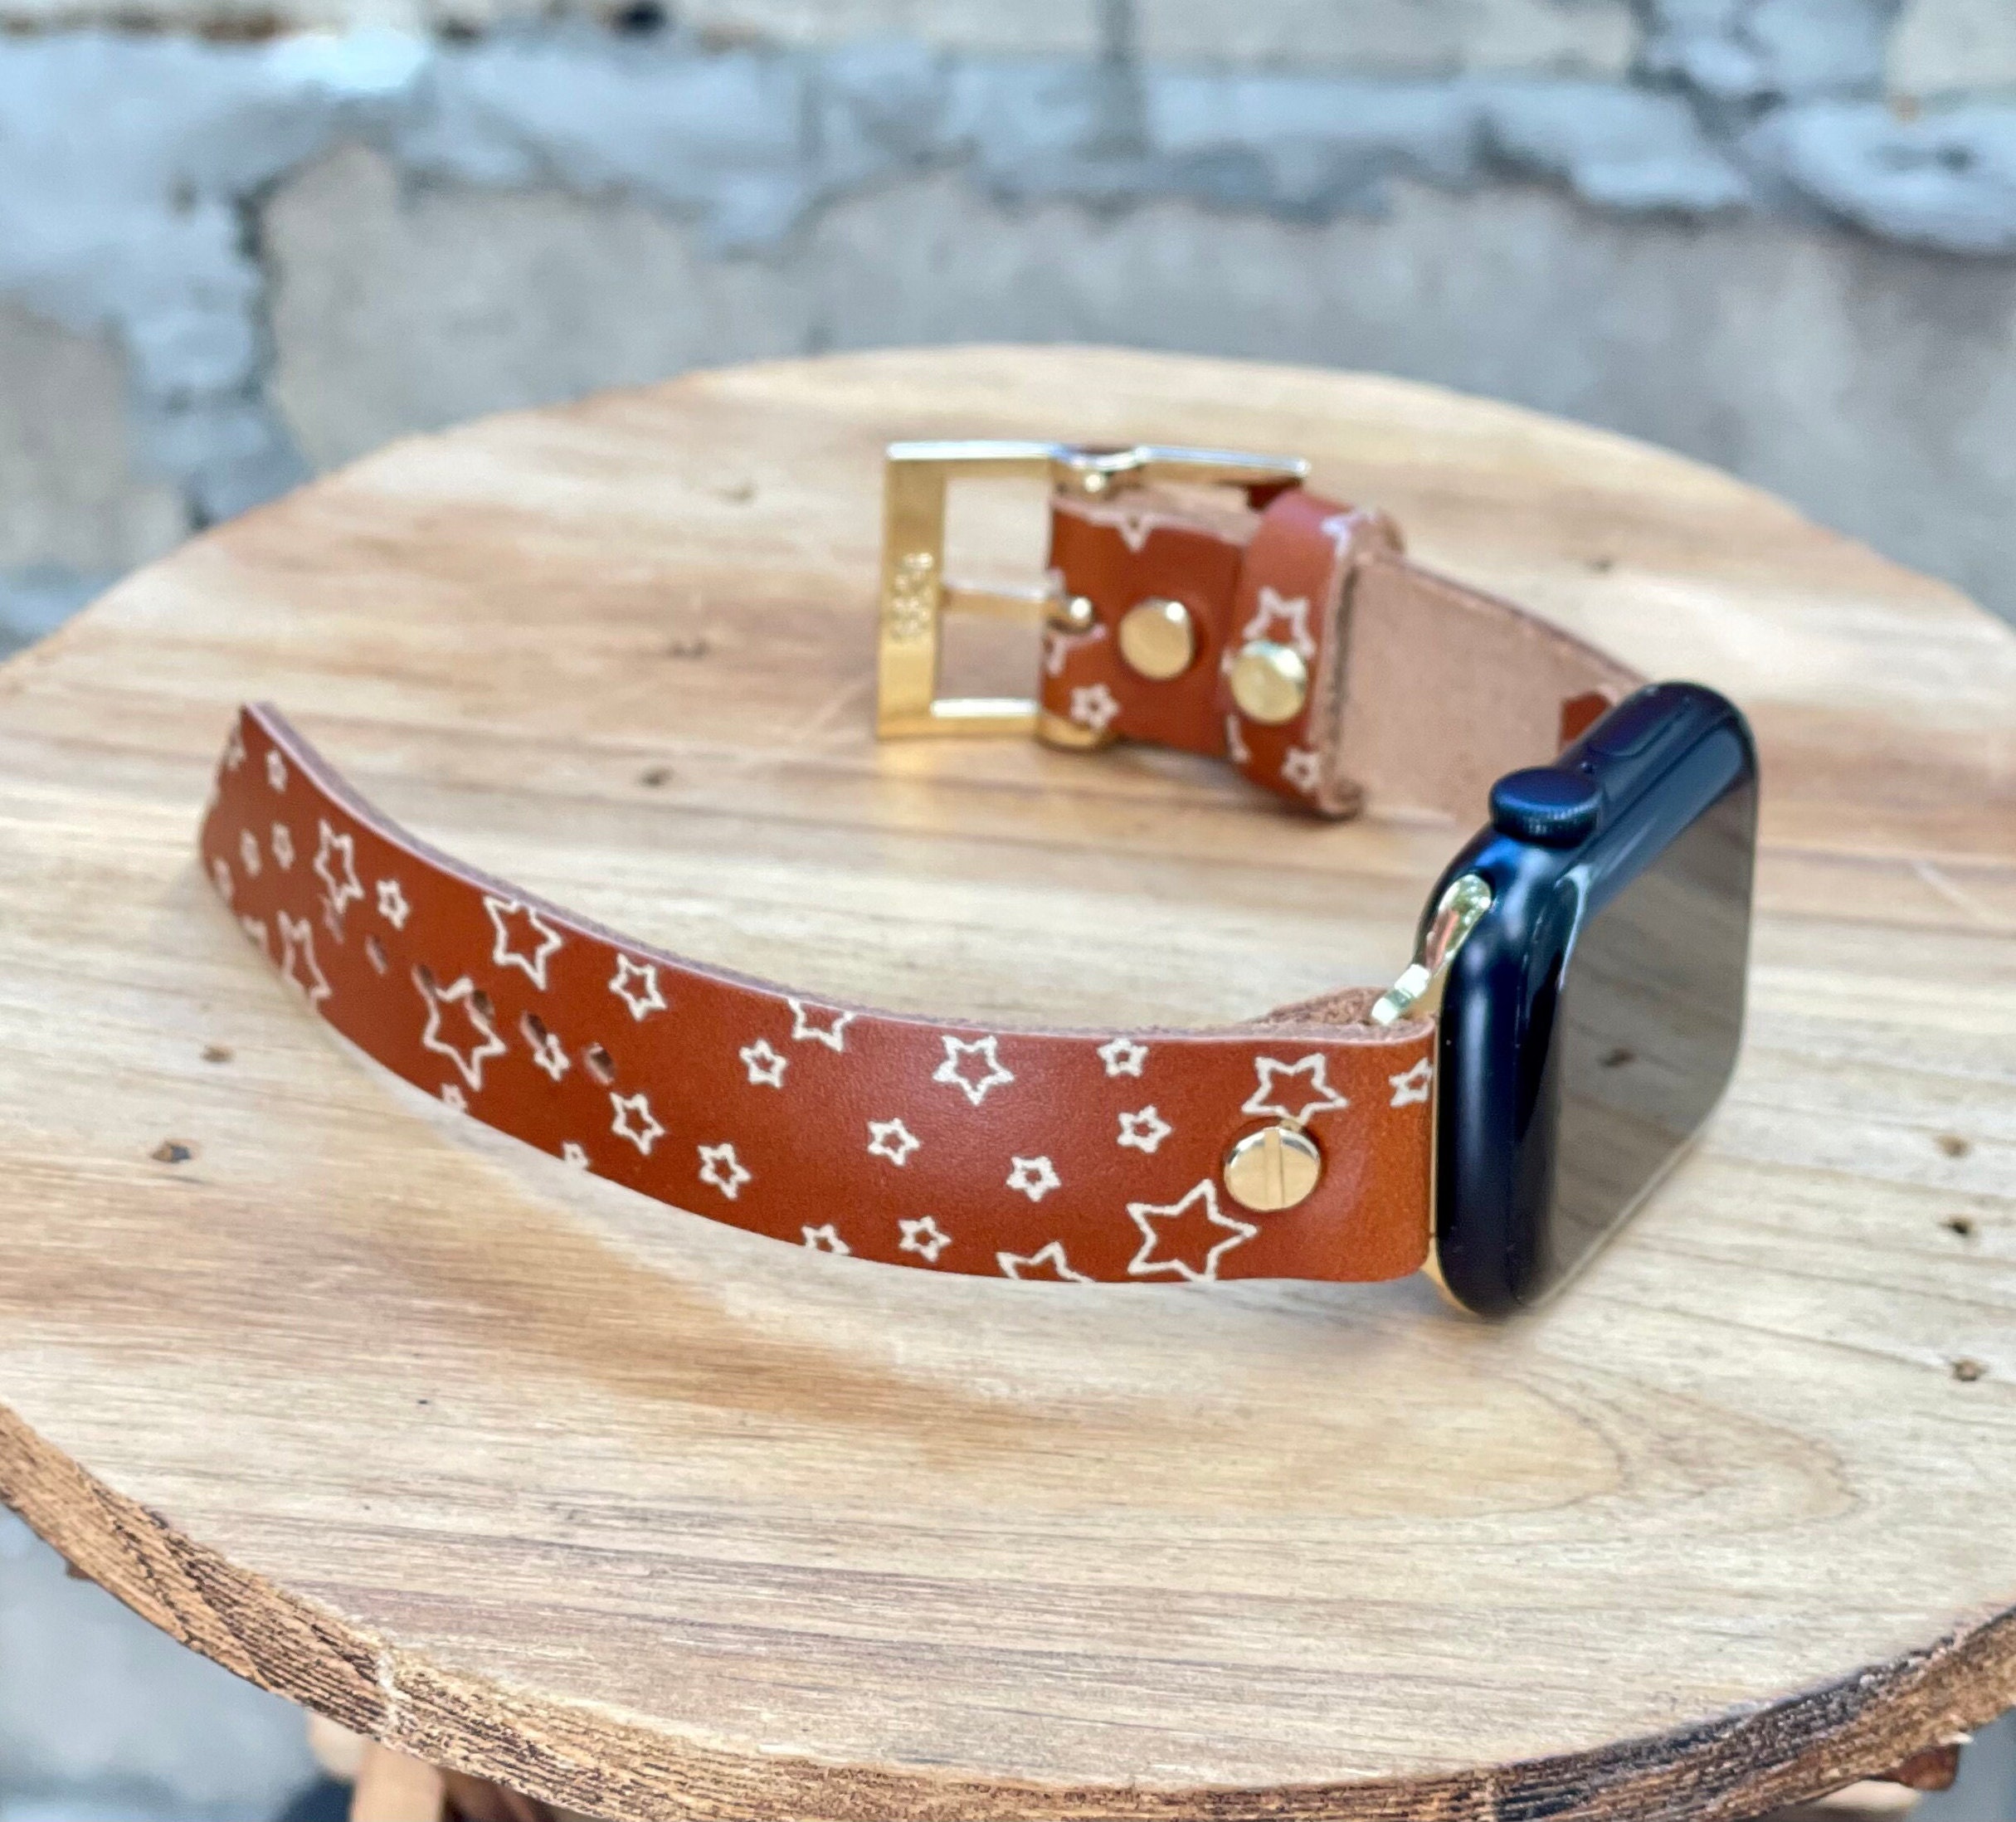 Apple Watch Band Brown Leather Stars Pattern Strap Women Gold